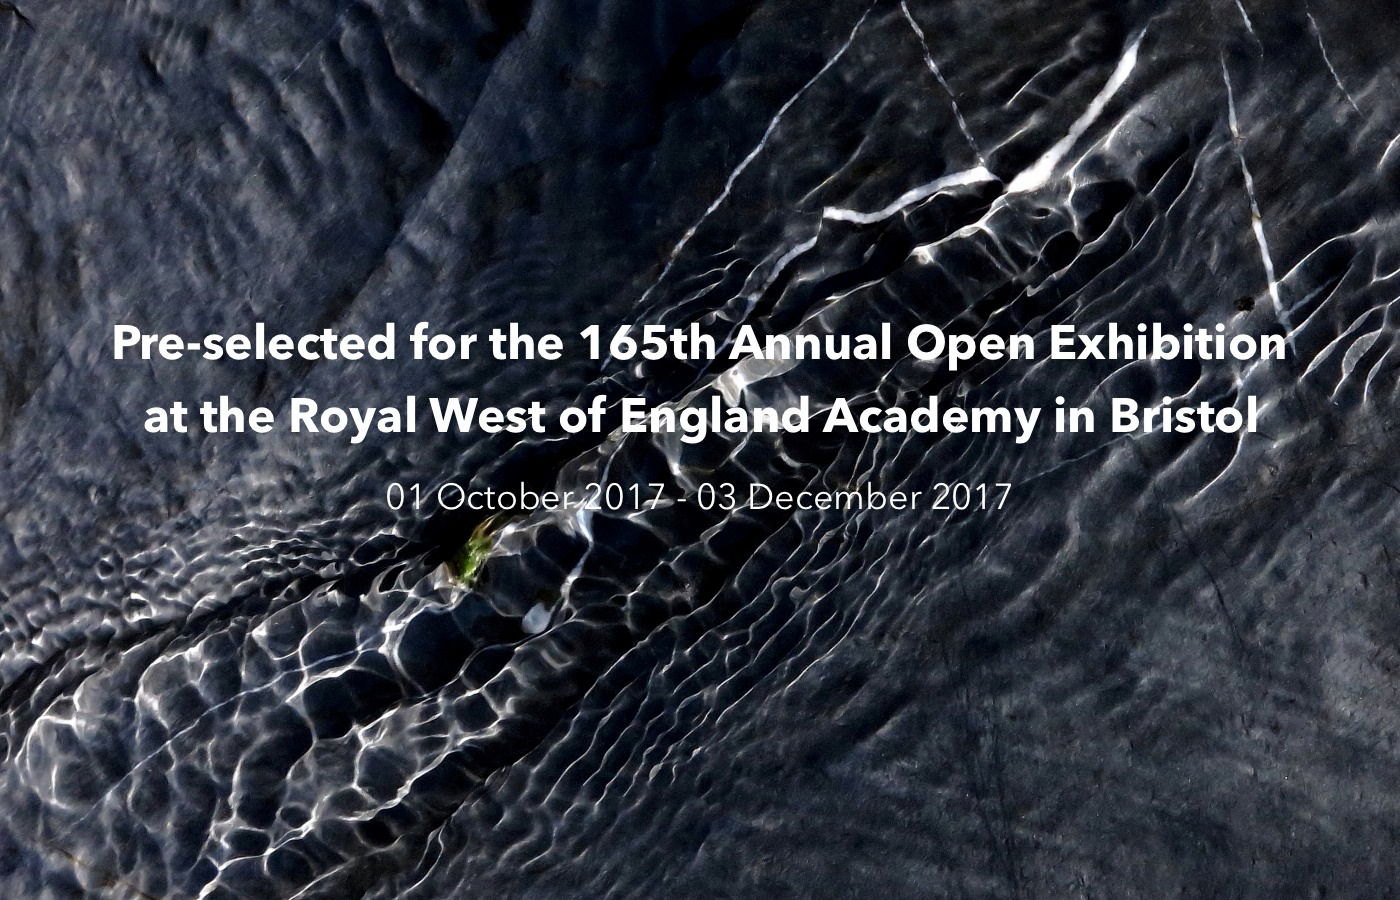 pre-selected for the 165th Annual Open Exhibition at the Royal West of England Academy in 2017